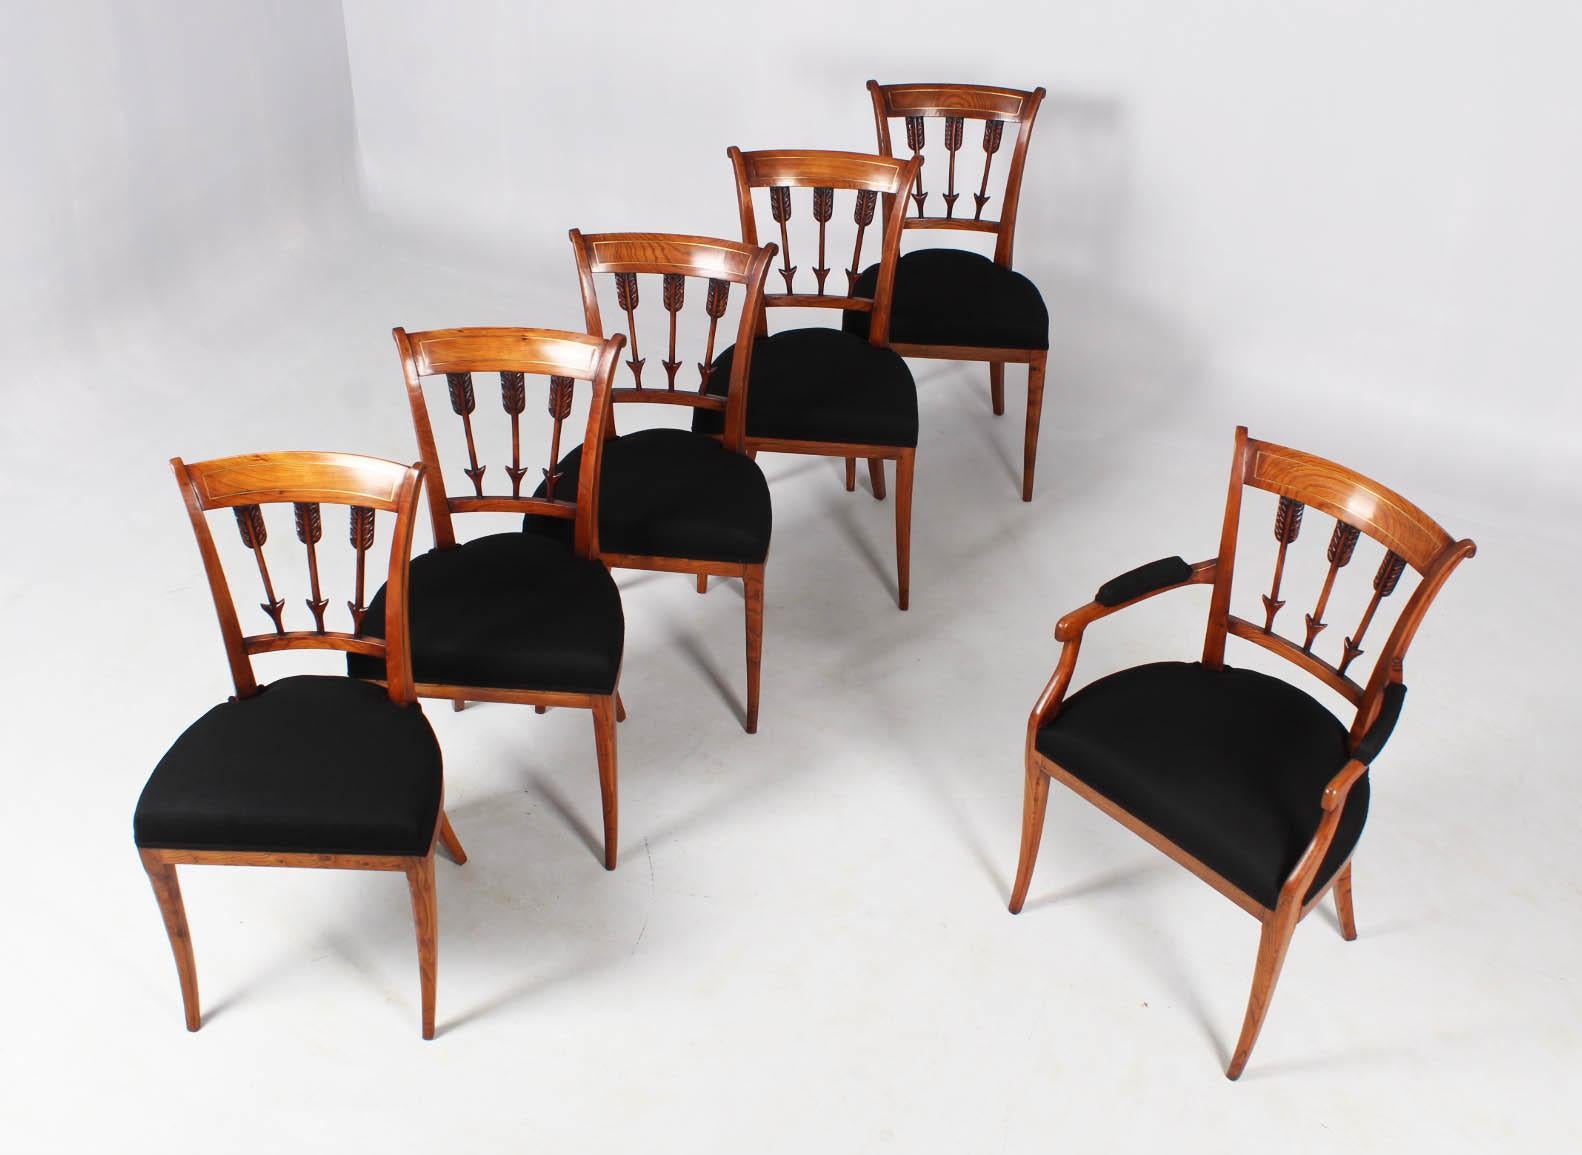 Set of six antique chairs

Netherlands
Ash
Directoire, around 1800

Dimensions: seat height ca 47 cm, back height ca 89 cm

Description:
Slightly flared legs with a beautiful swing. The back legs elegantly merge into the backrest, a